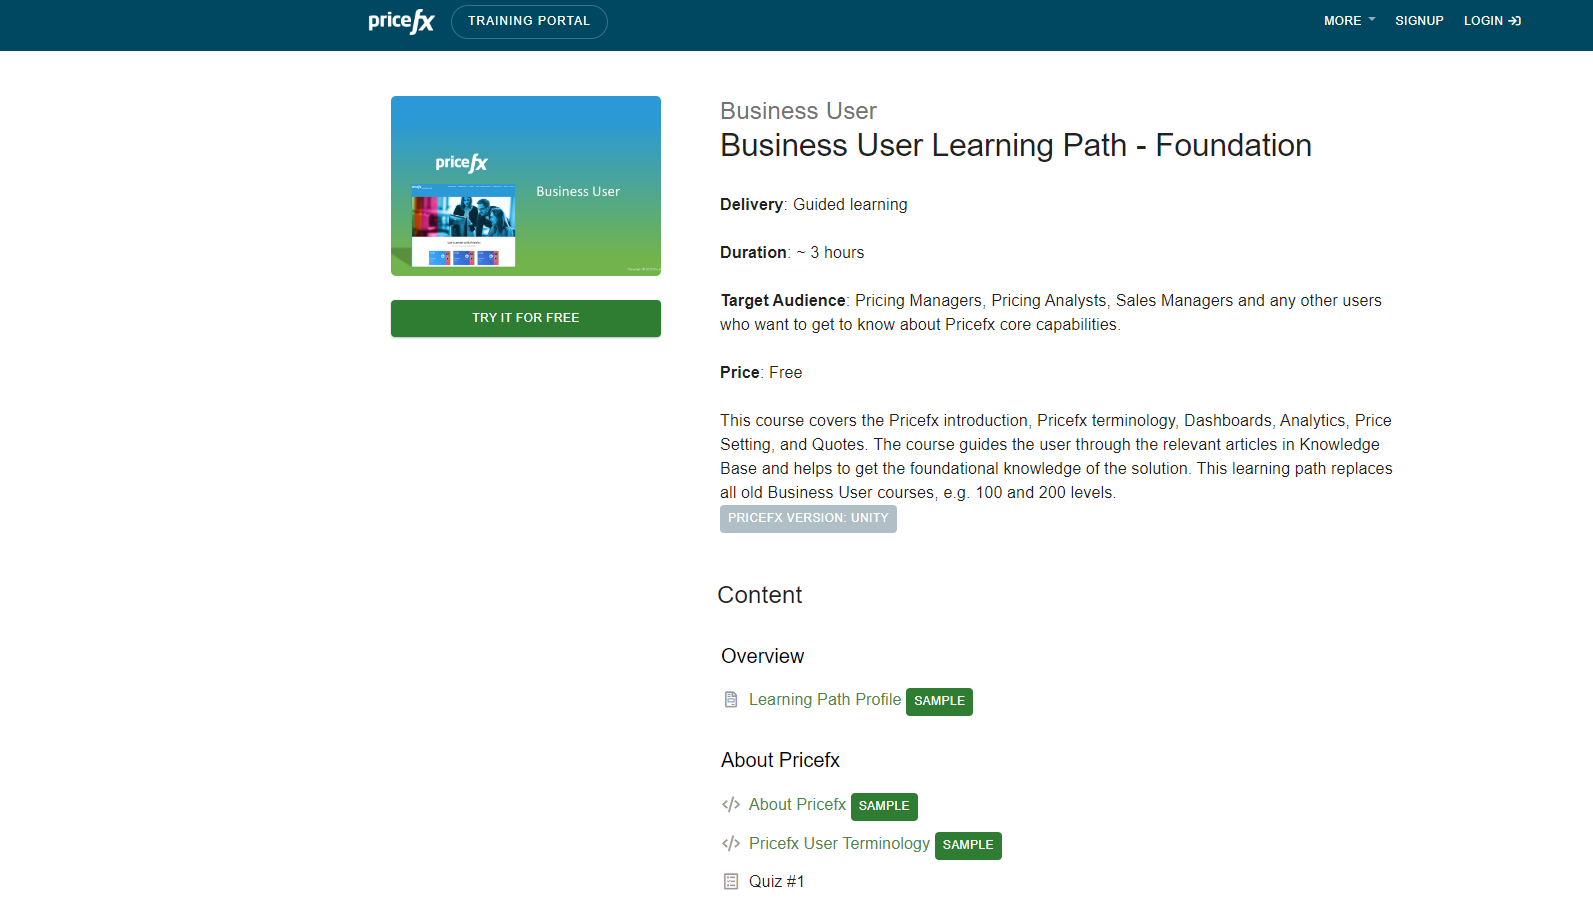 Pricefx-Business-User-Learning-Path-Foundation